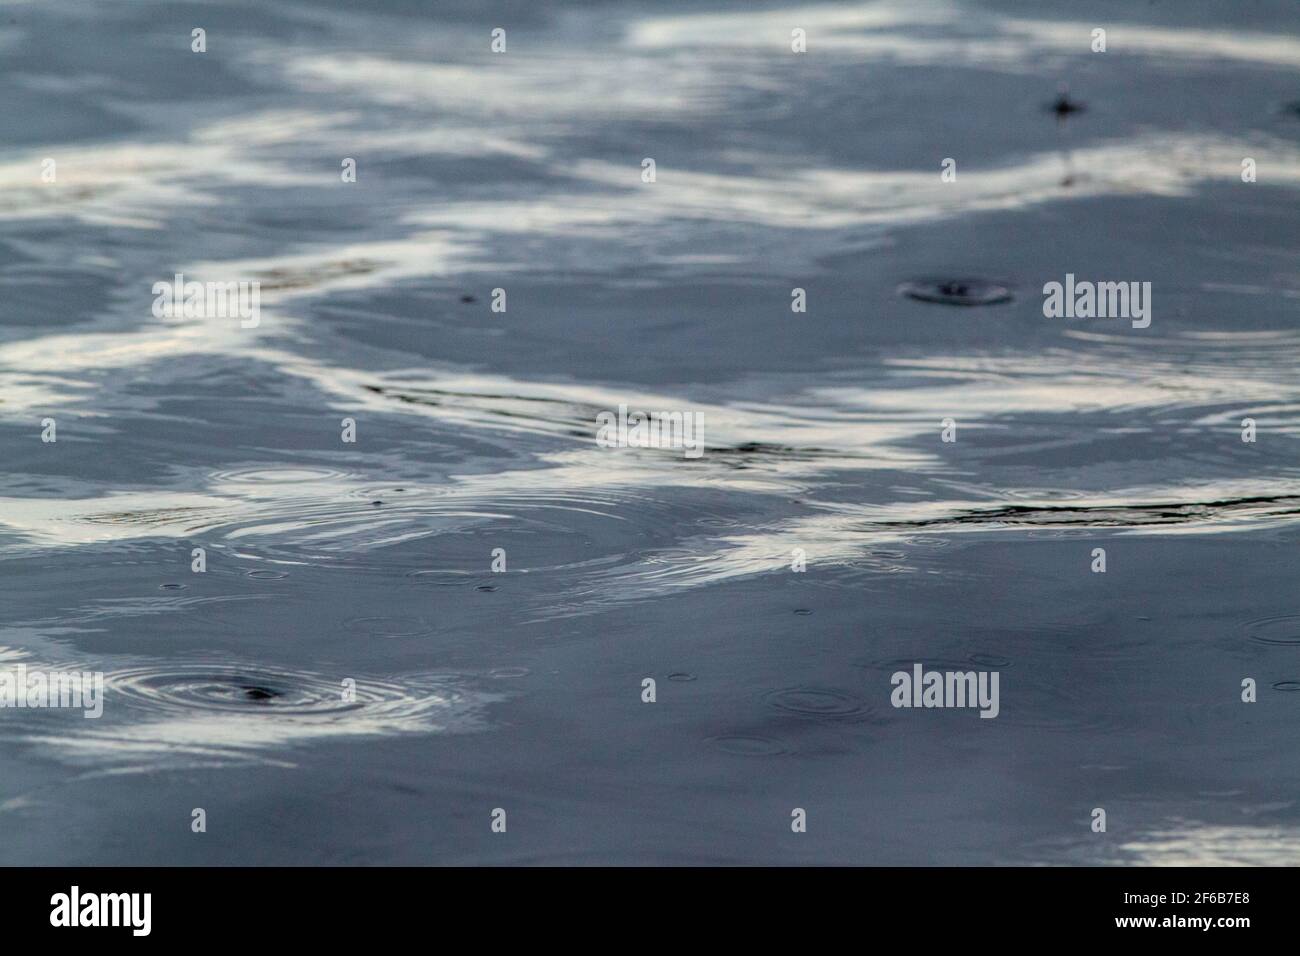 Swell Patterns, shapes, created, formed, forming, evolving, from continuous, continuing, falling raindrops on a flowing river surface. Highlight, high Stock Photo